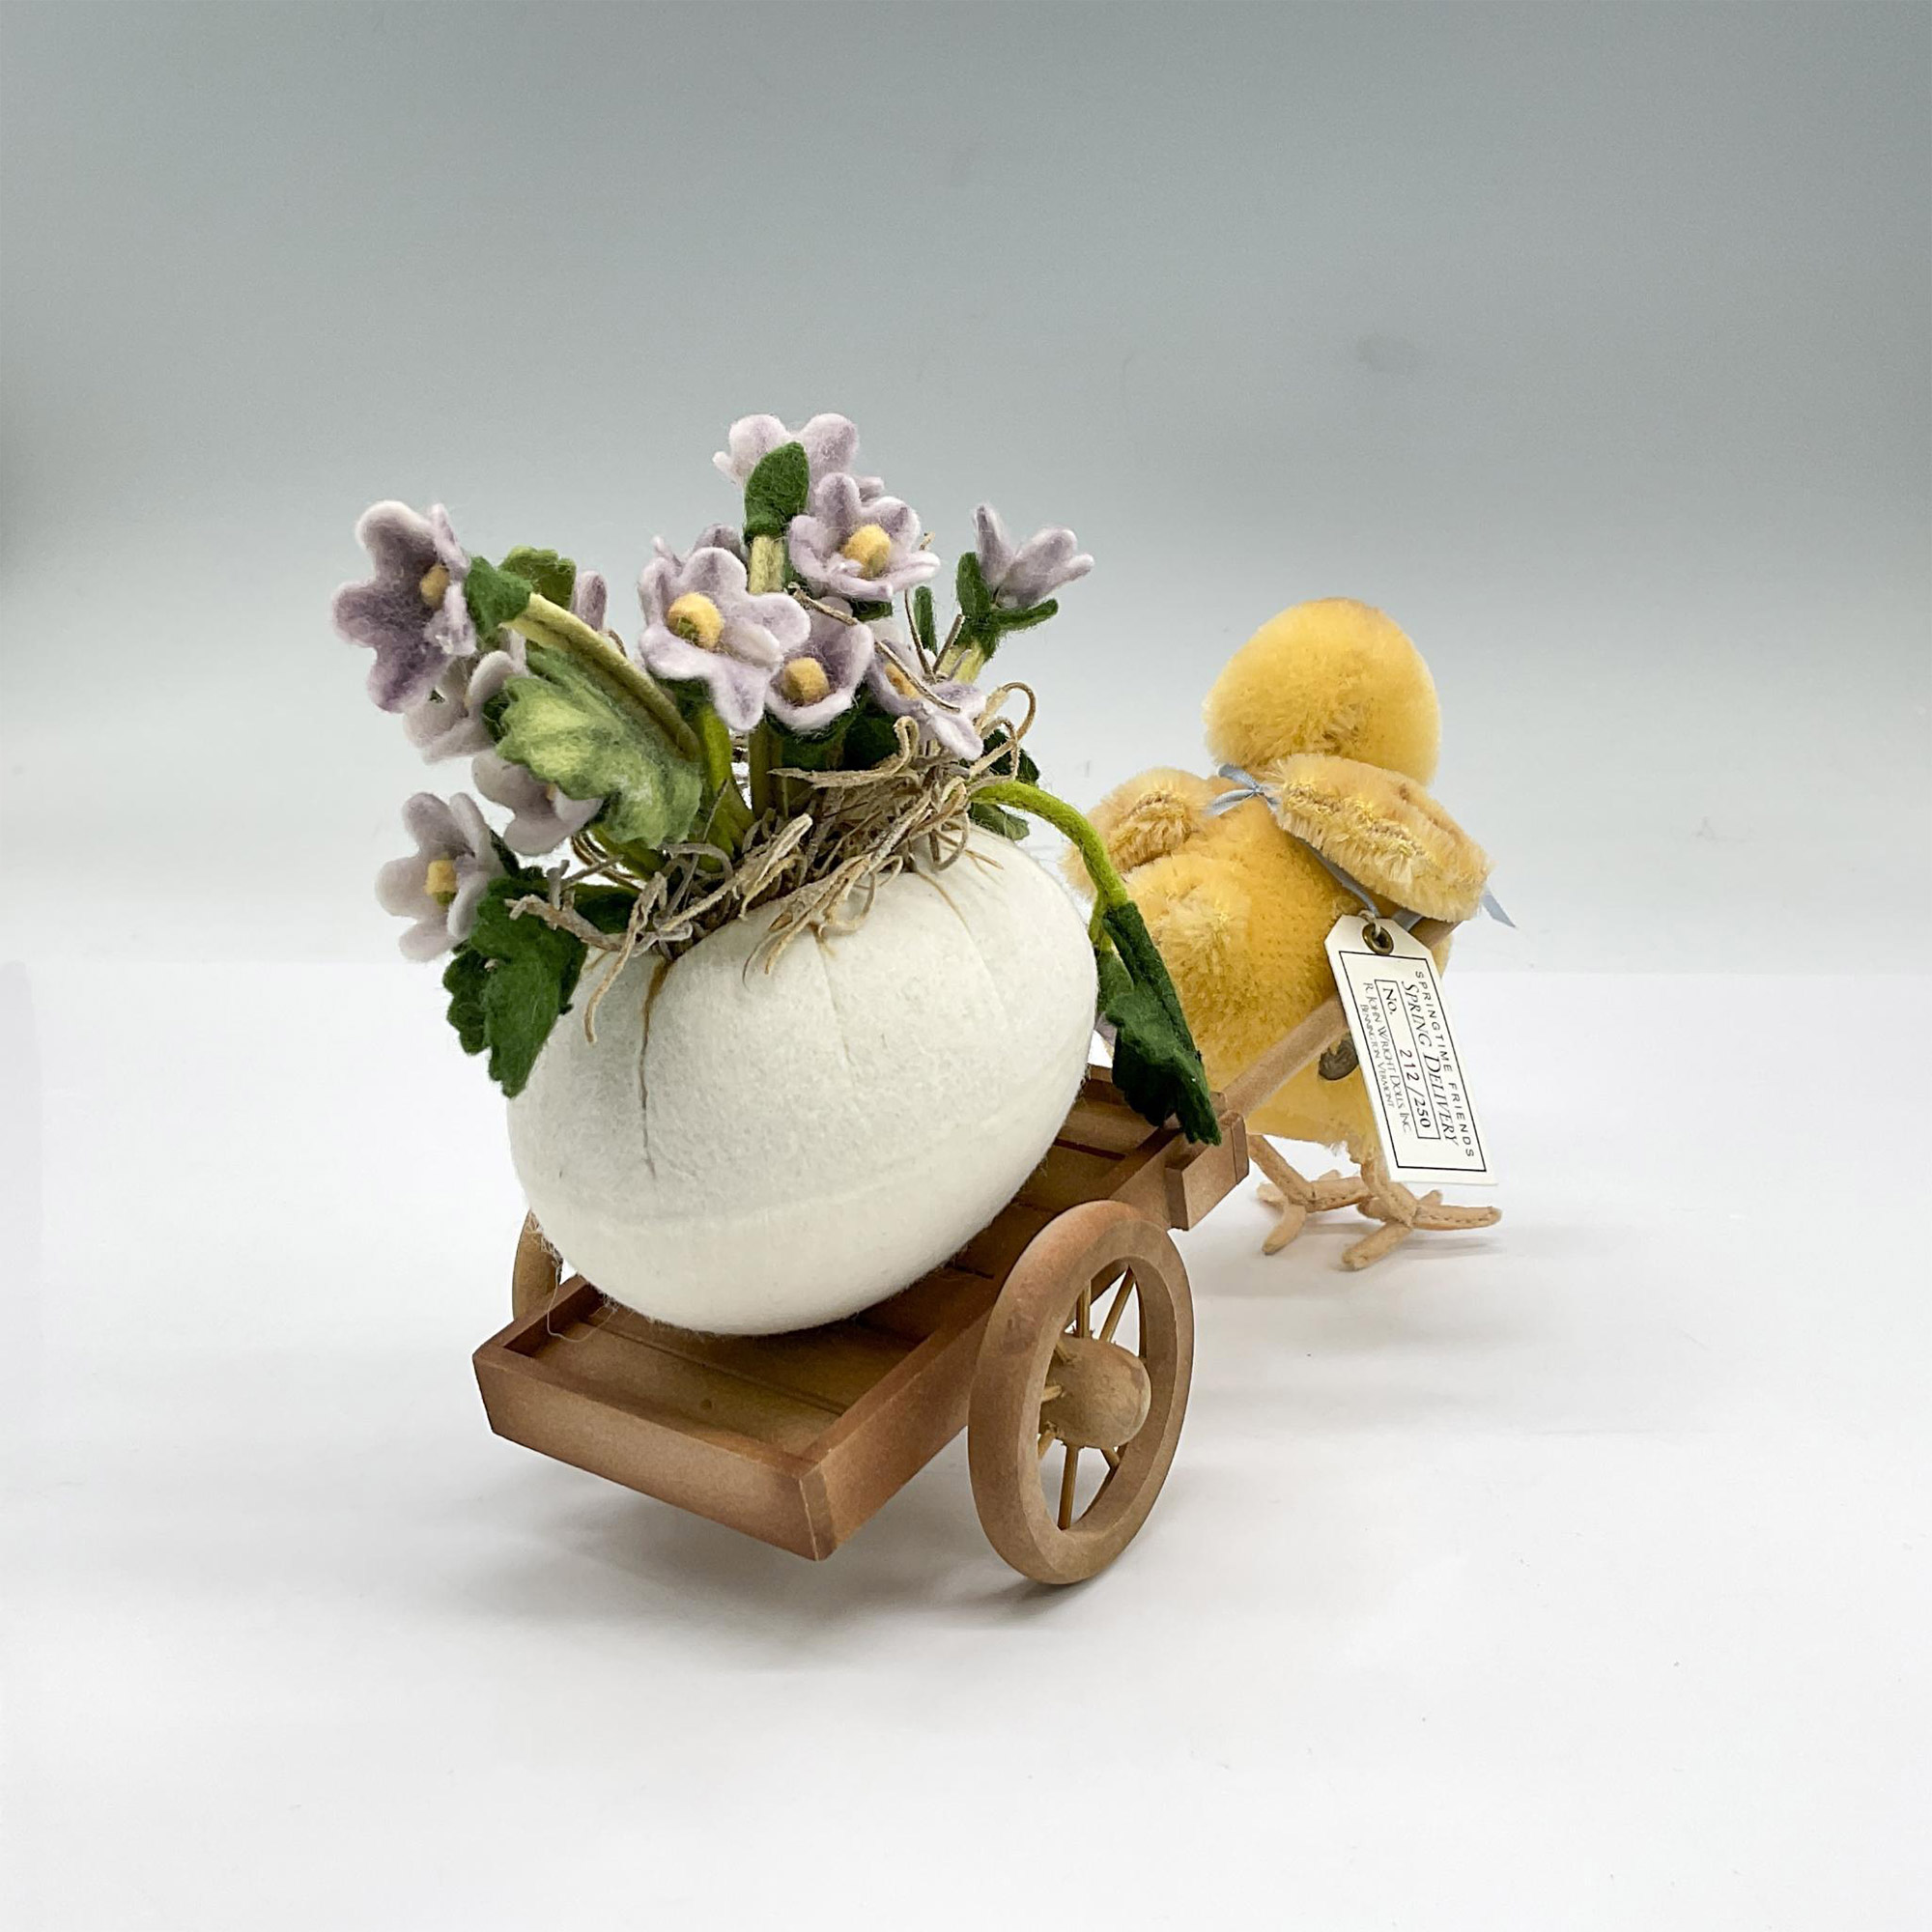 R. John Wright Stuffed Animal, Spring Delivery Chick - Image 3 of 5